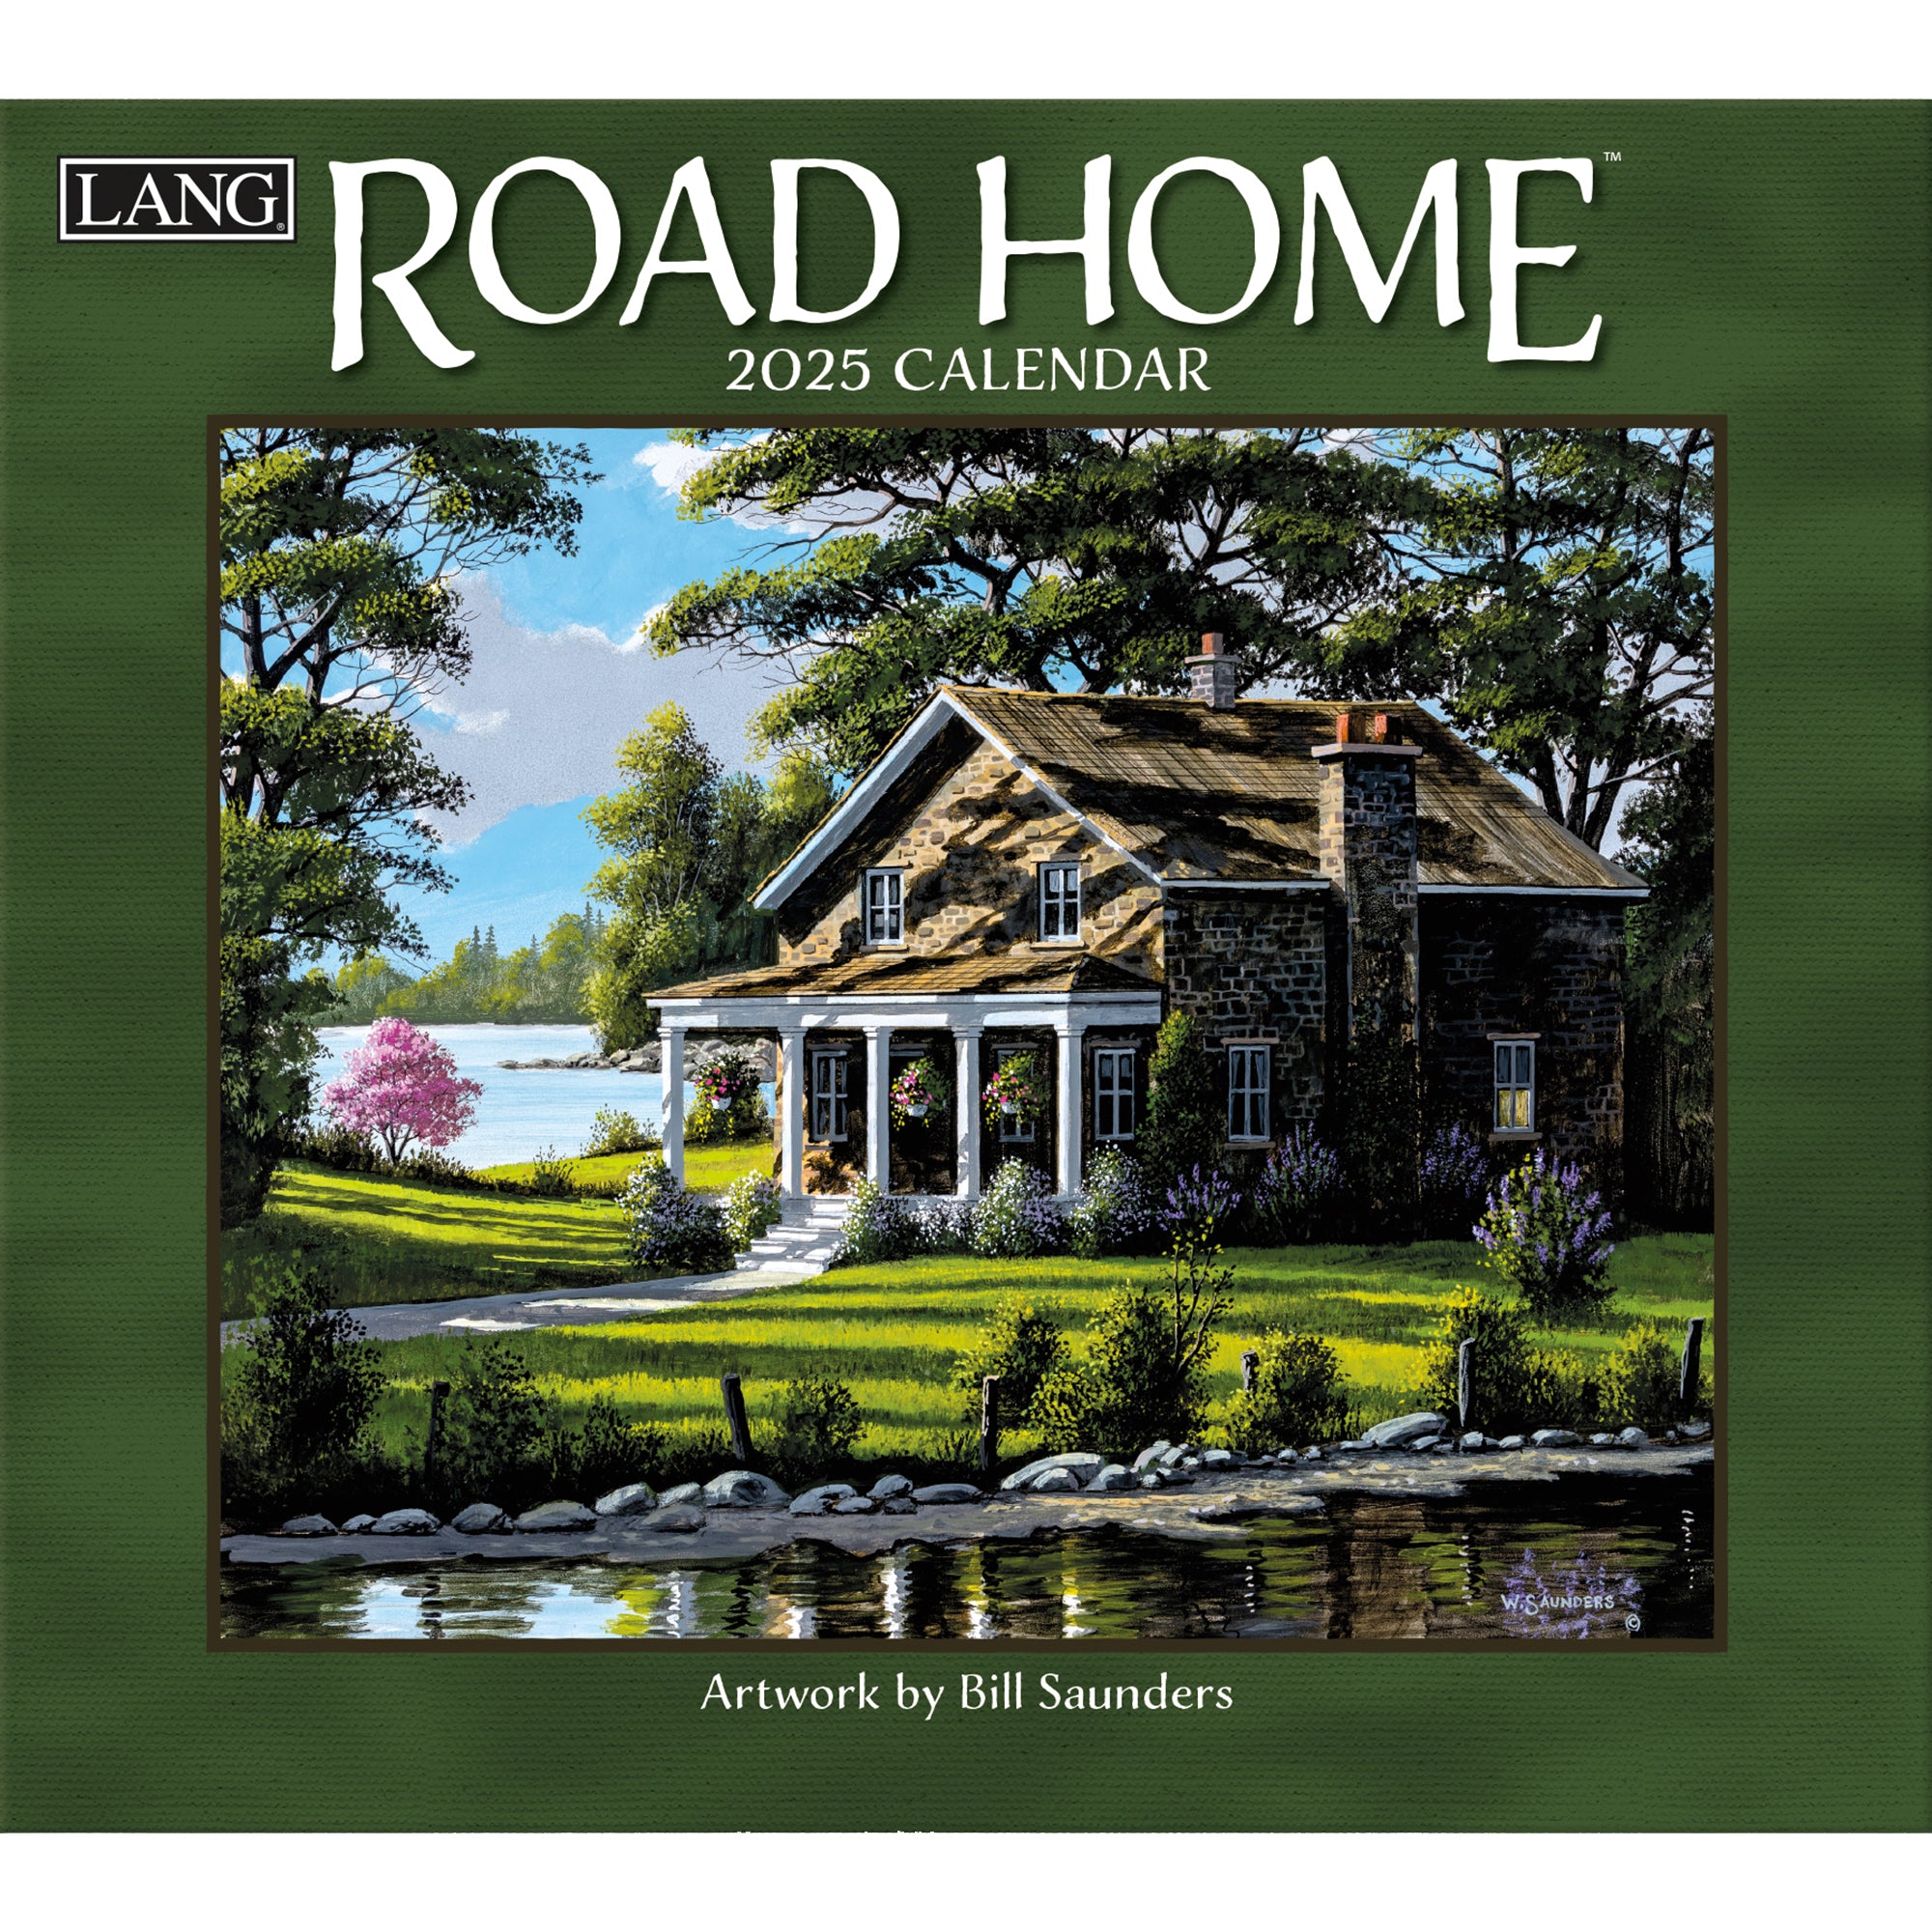 2025 Road Home By Bill Saunders - LANG Deluxe Wall Calendar